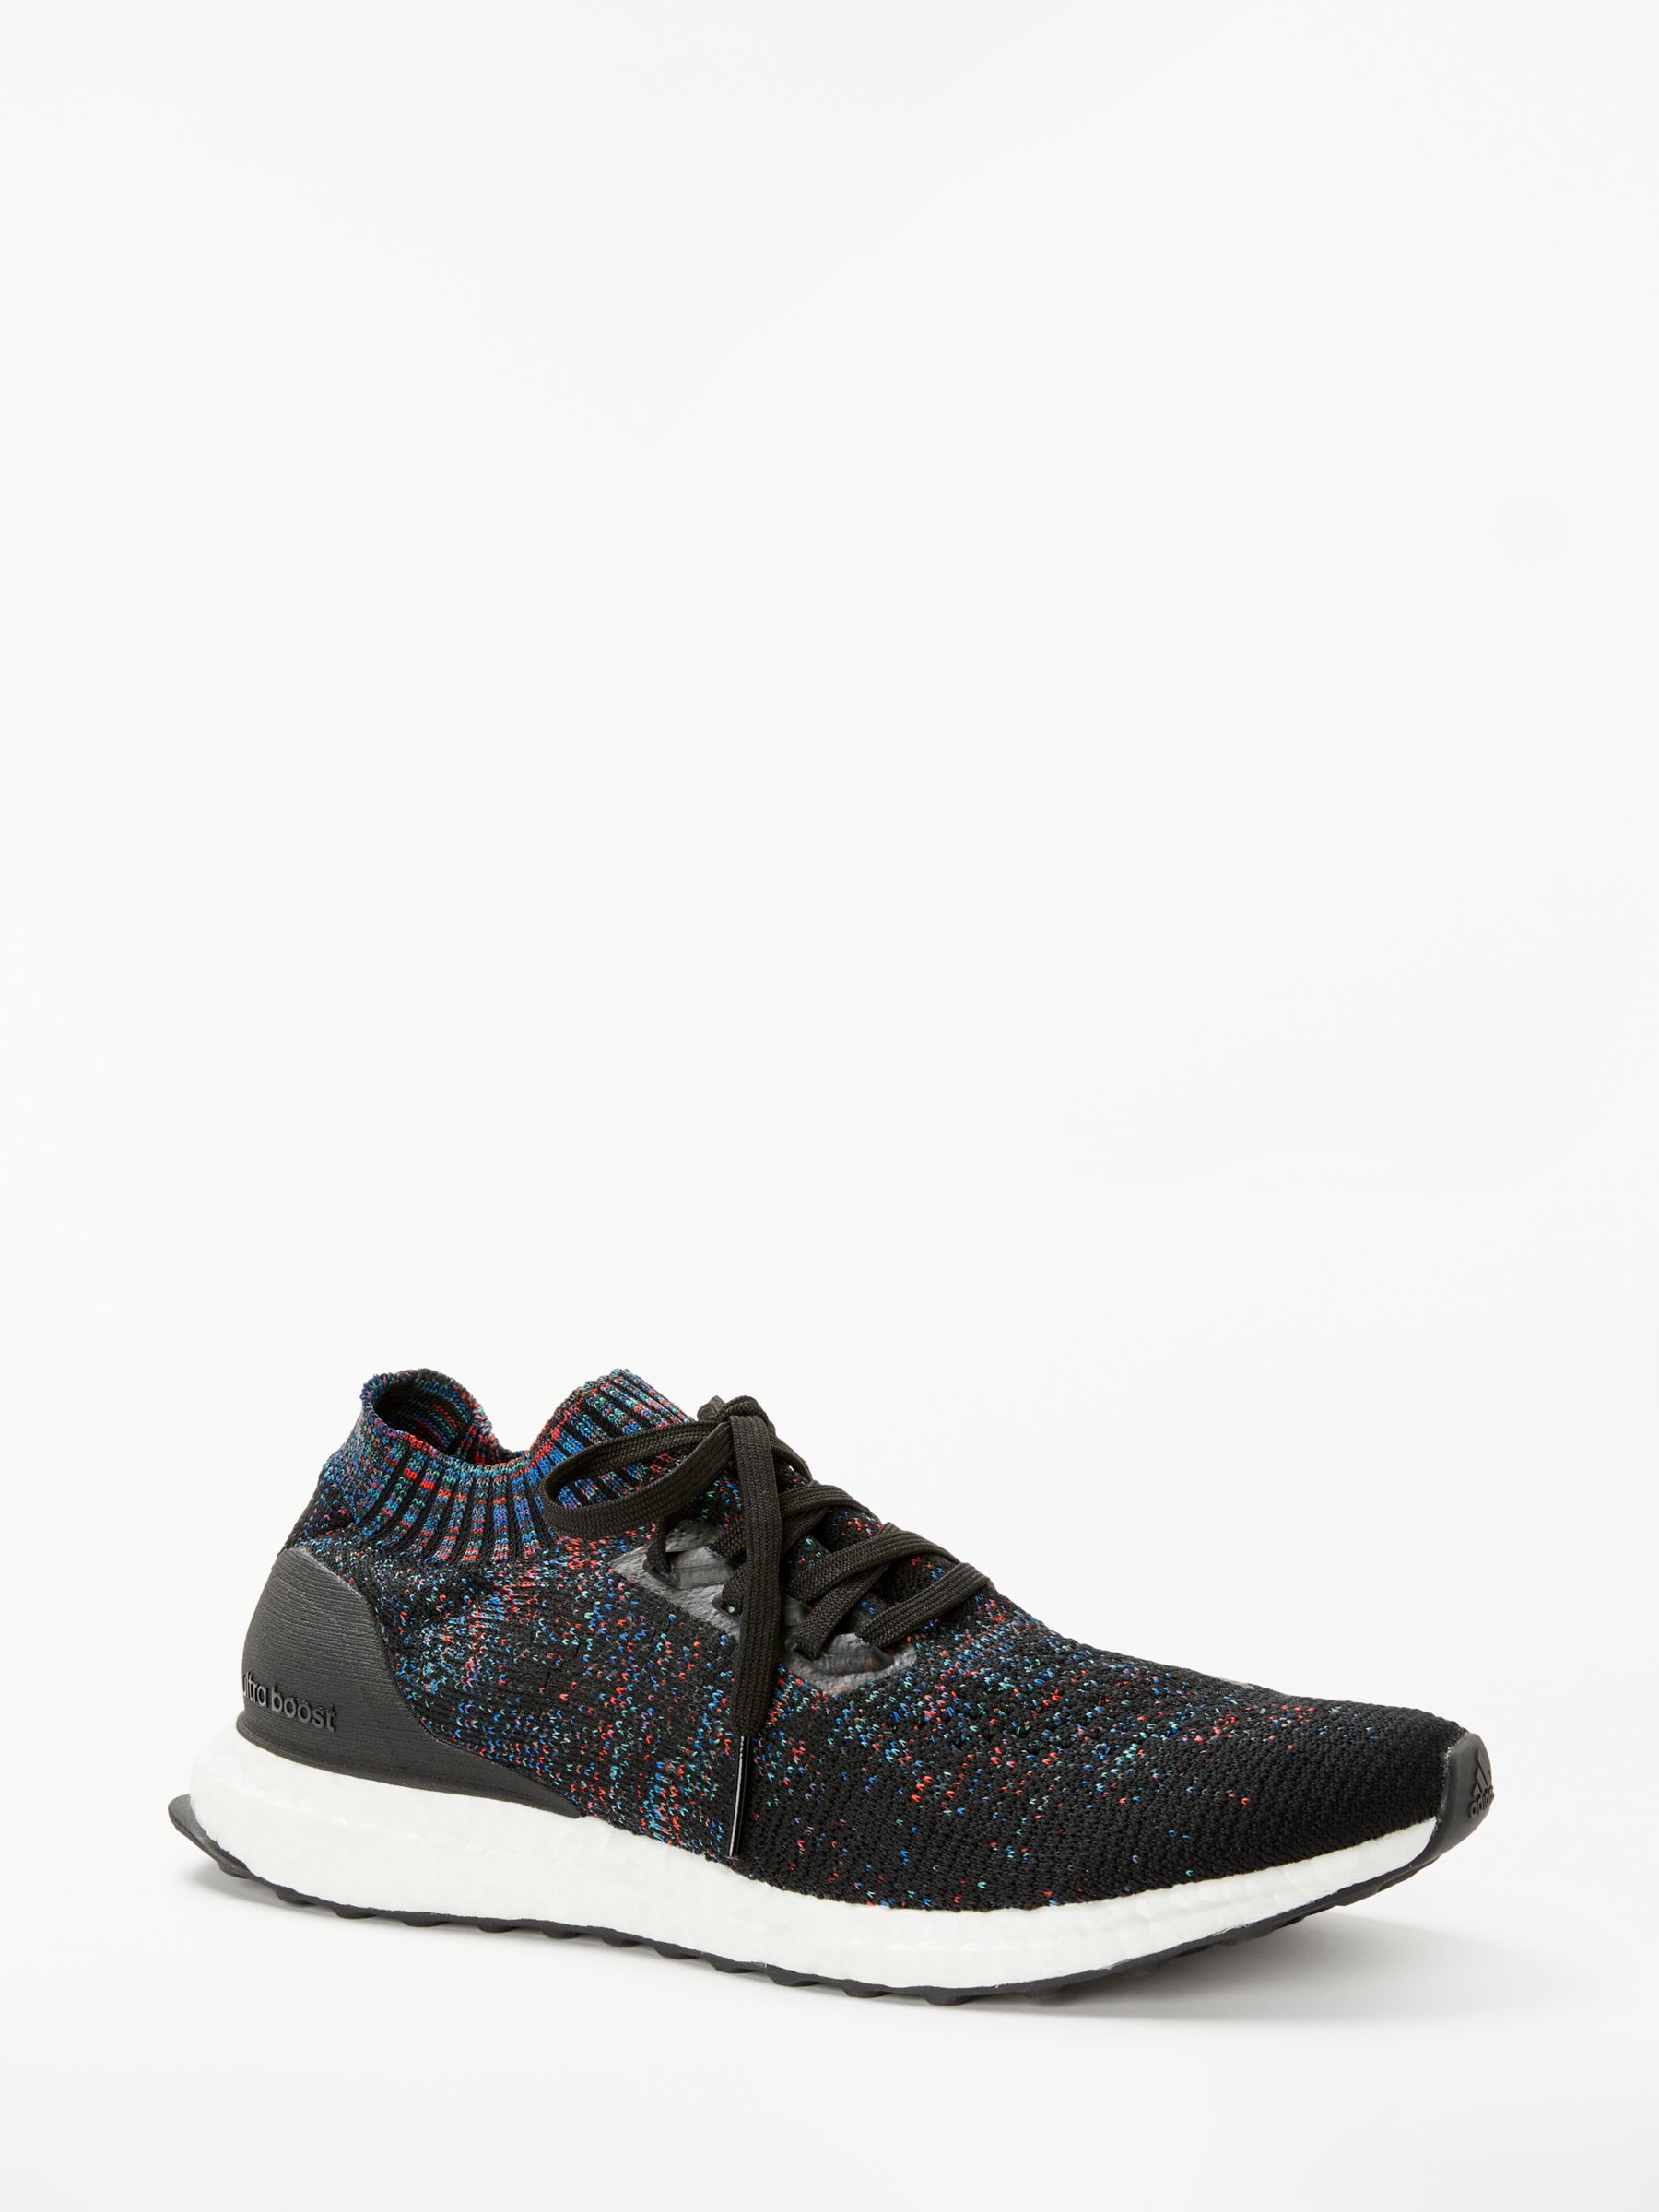 adidas ultraboost uncaged running shoes for men